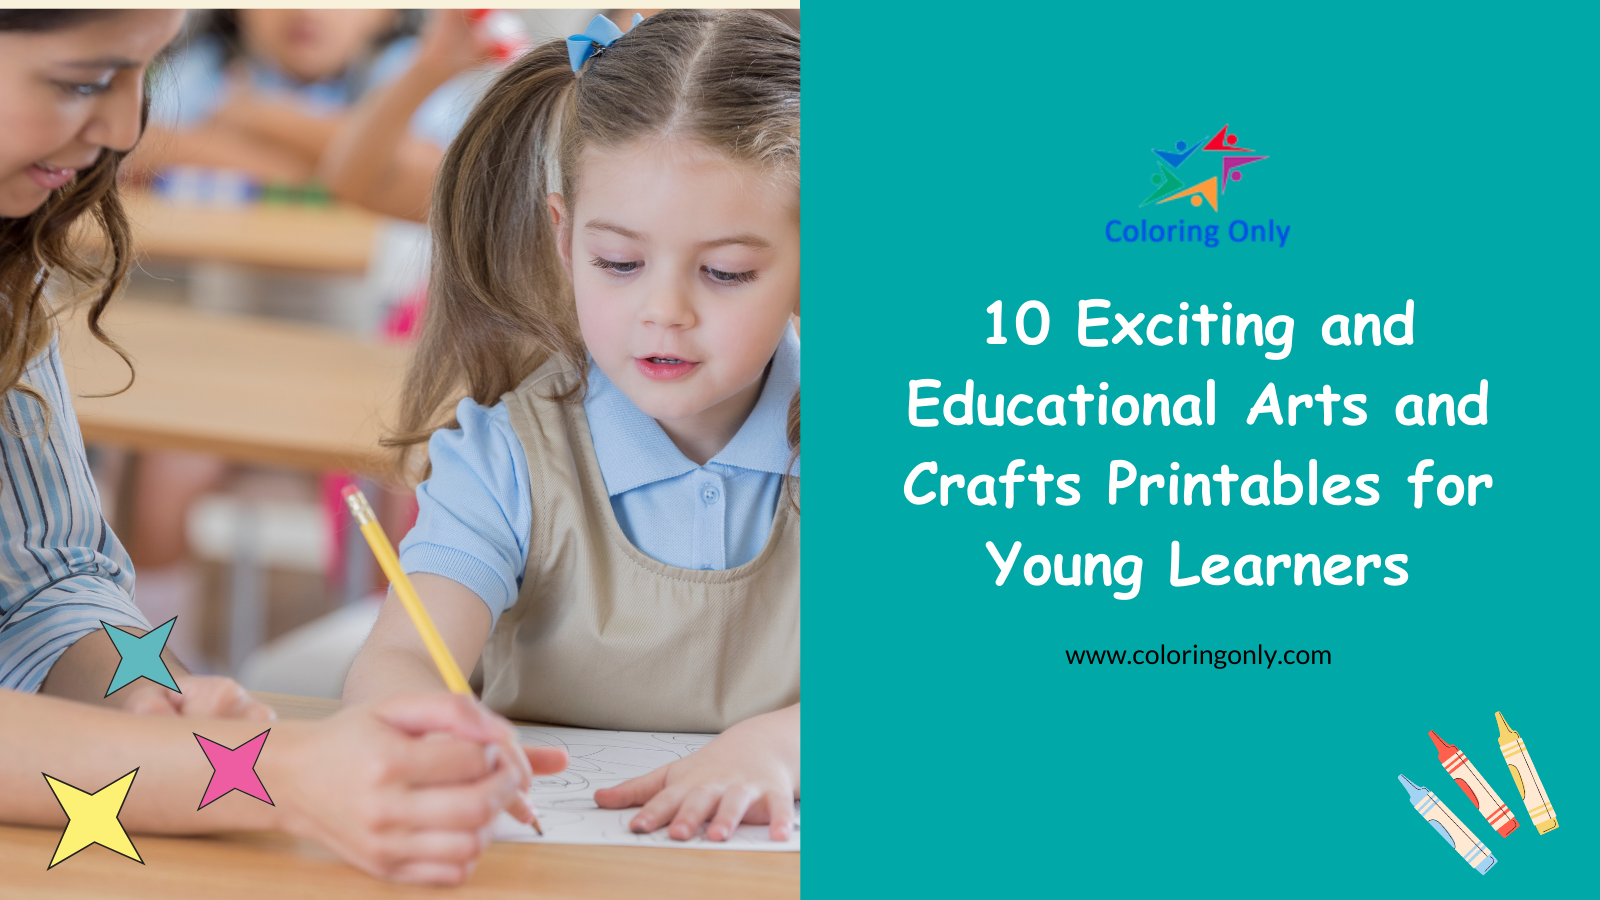 10 Exciting and Educational Arts and Crafts Printables for Young Learners